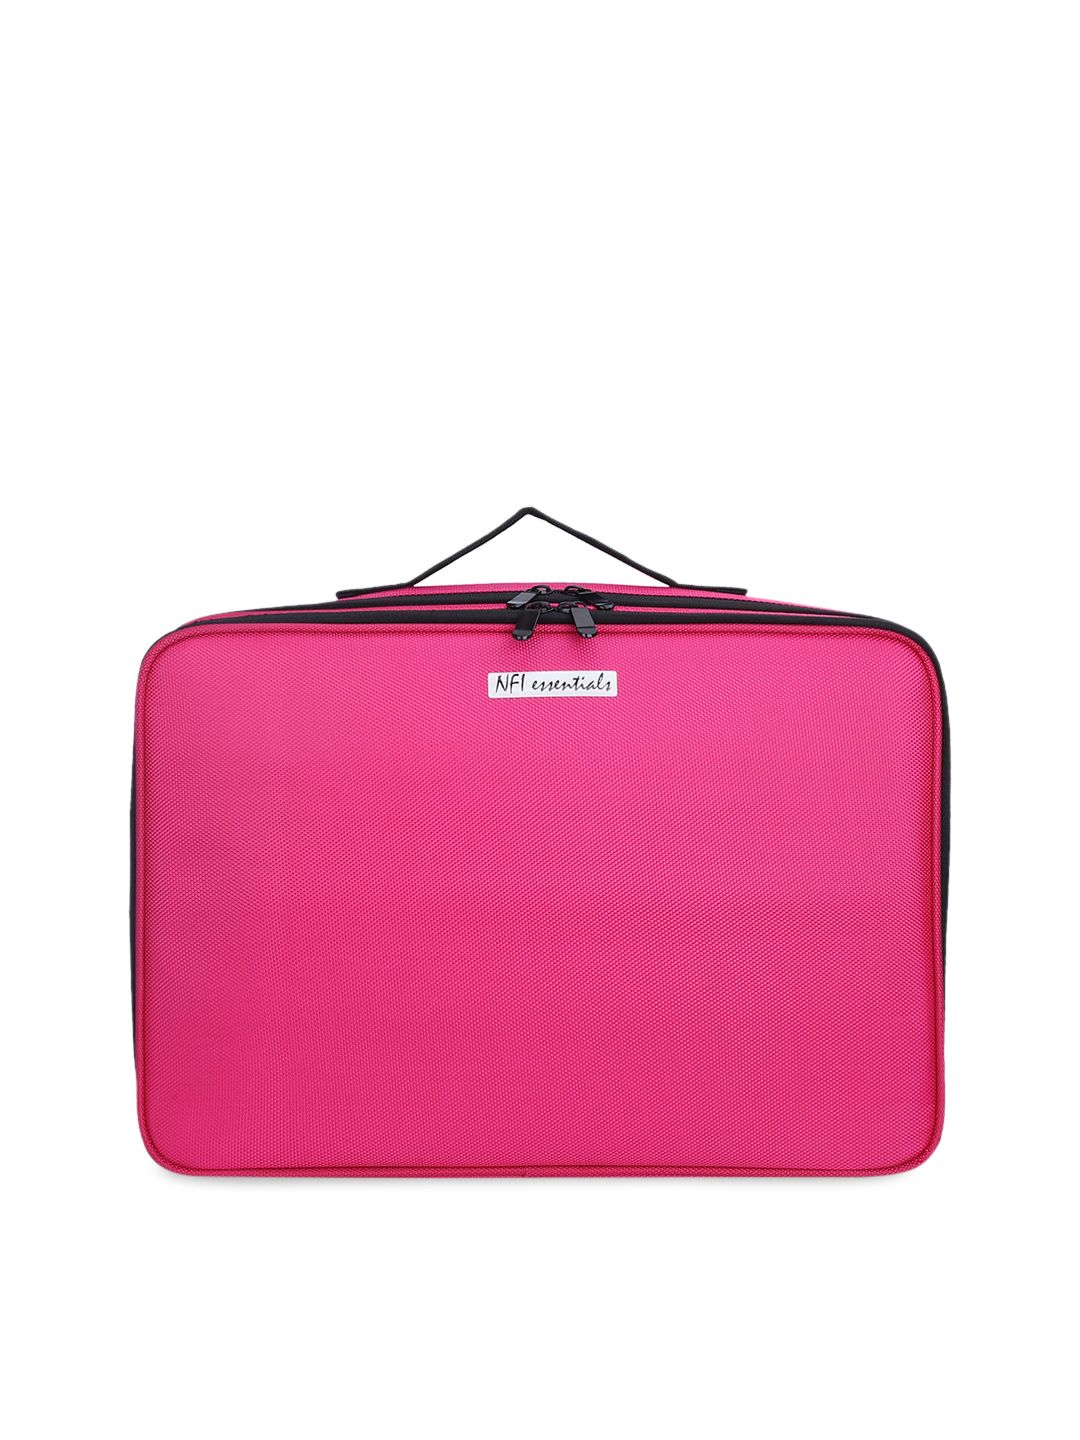 NFI essentials Pink Solid 3-Layered Travel Makeup Box Price in India